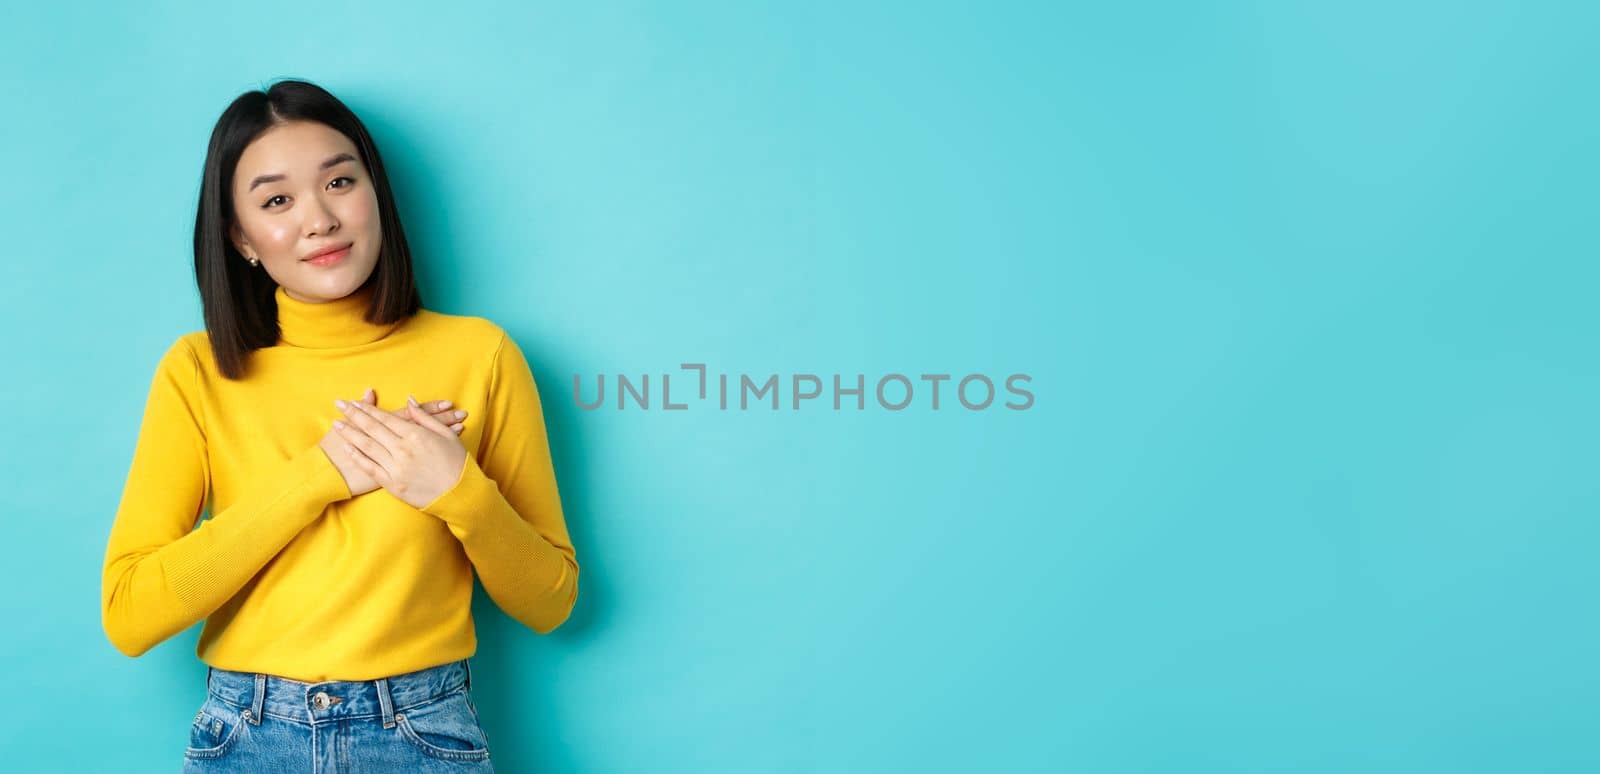 Portrait of beautiful heartfelt woman holding hands on heart, smiling and listening compassionate, standing over blue background in yellow pullover.